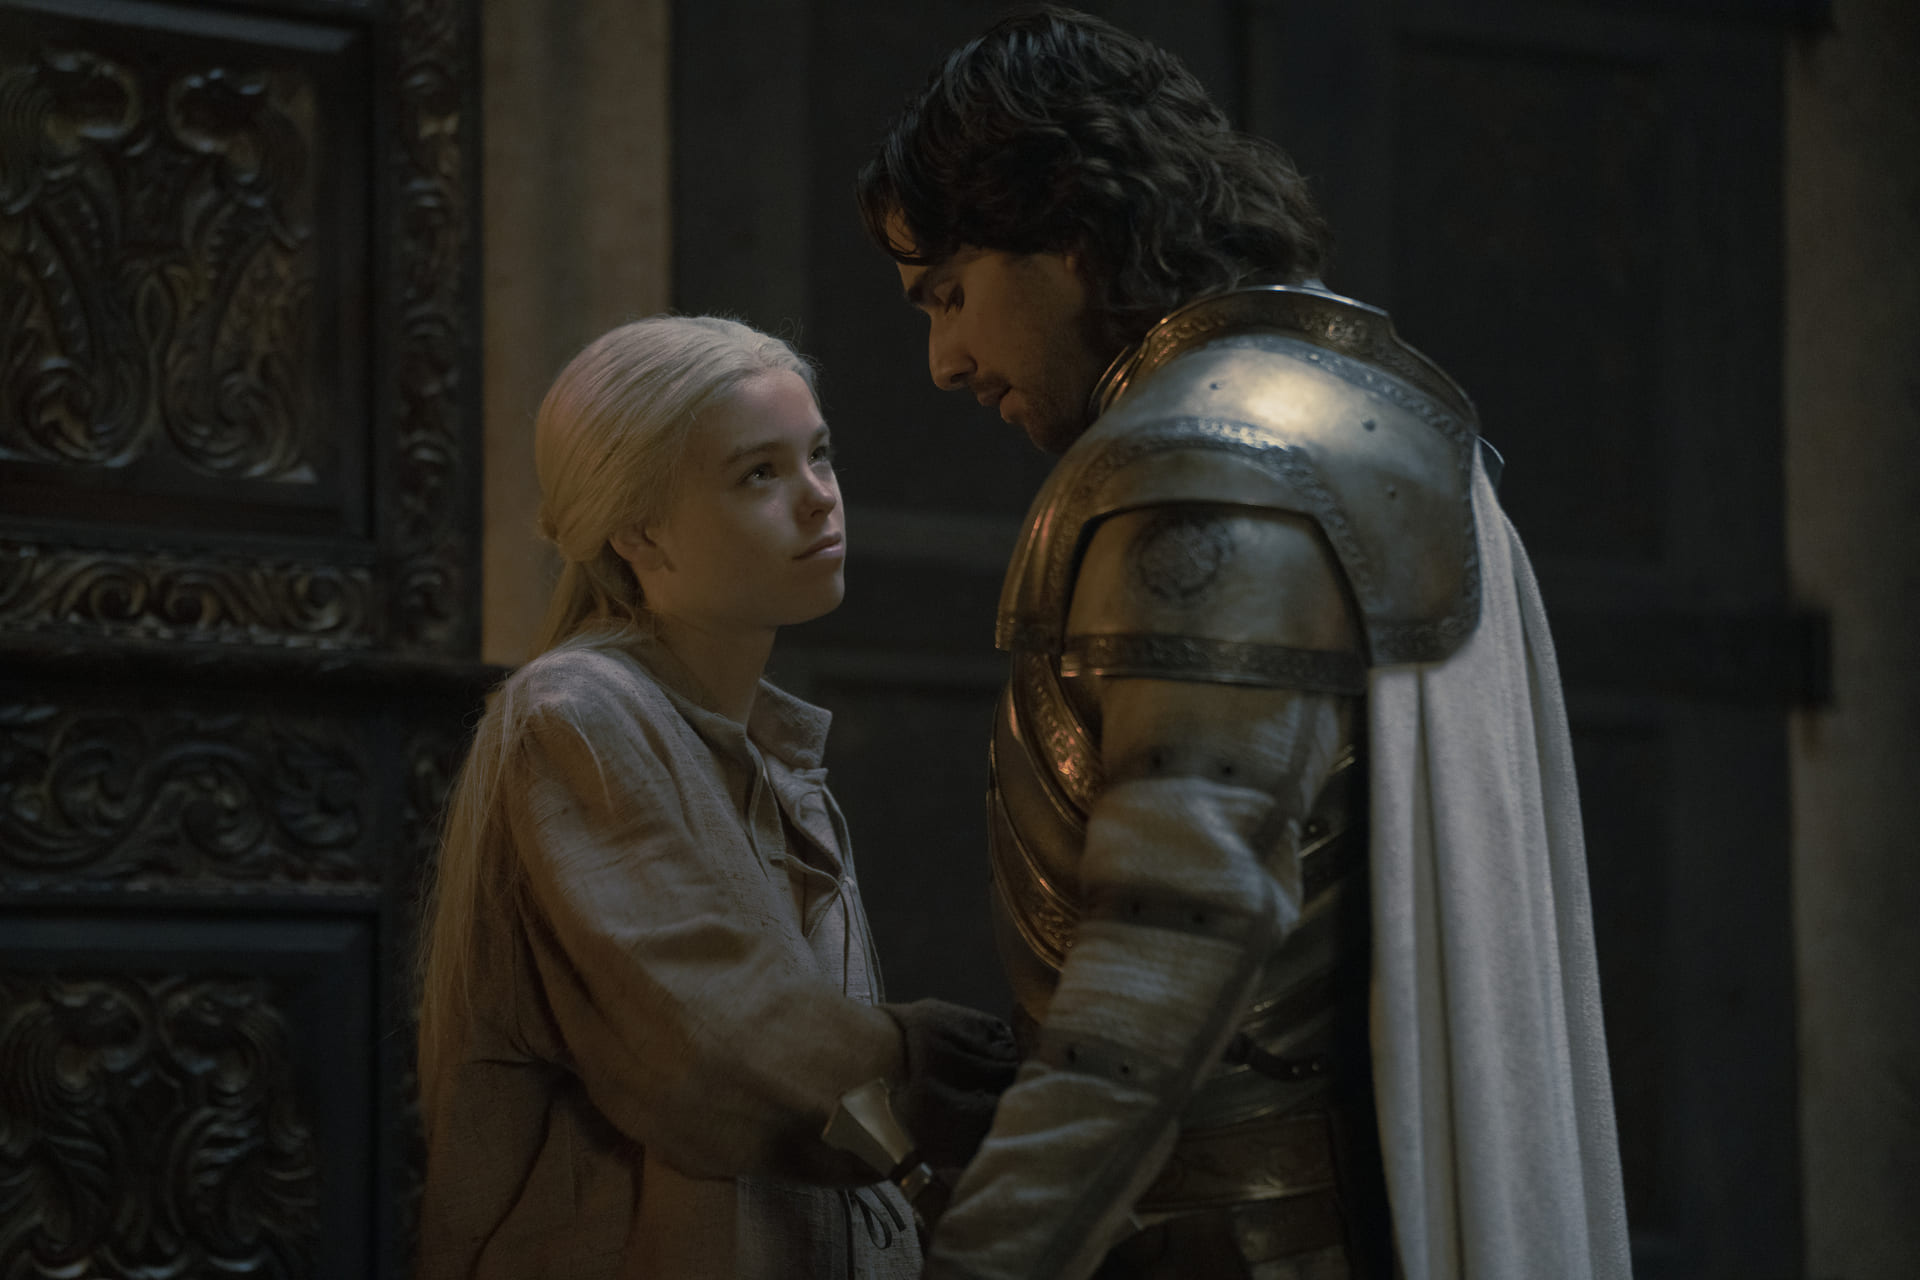 Young Rhaenyra (Milly Alcock), Criston Cole (Fabien Frankel), King's Landing, Red Keep 1x04